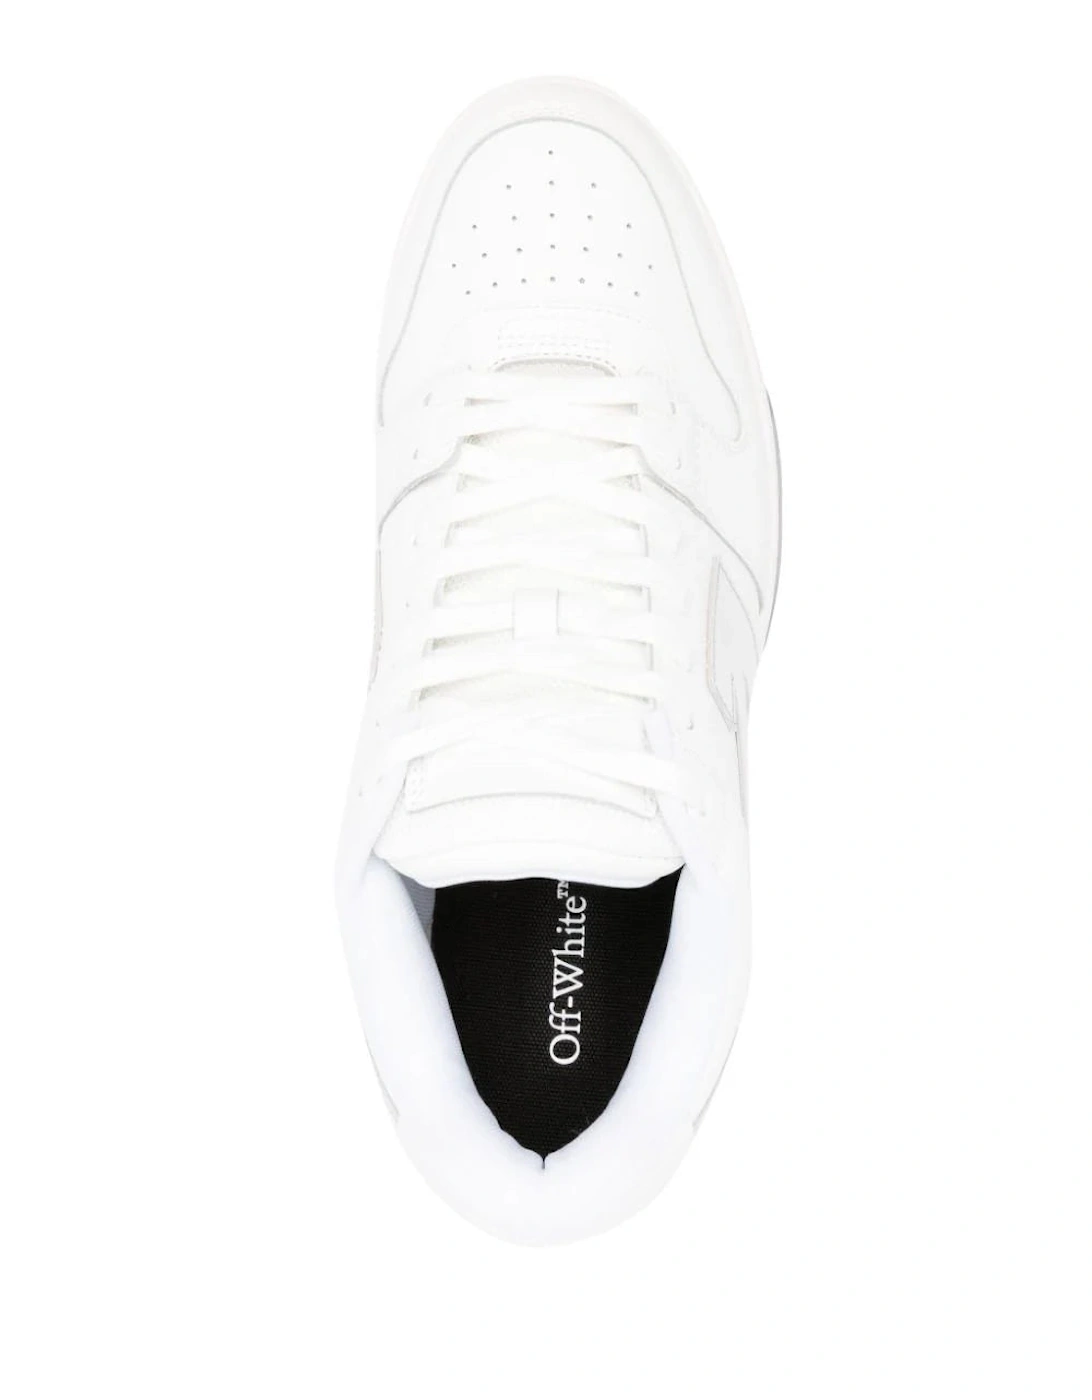 Out of Office Leather Trainers in White/Silver